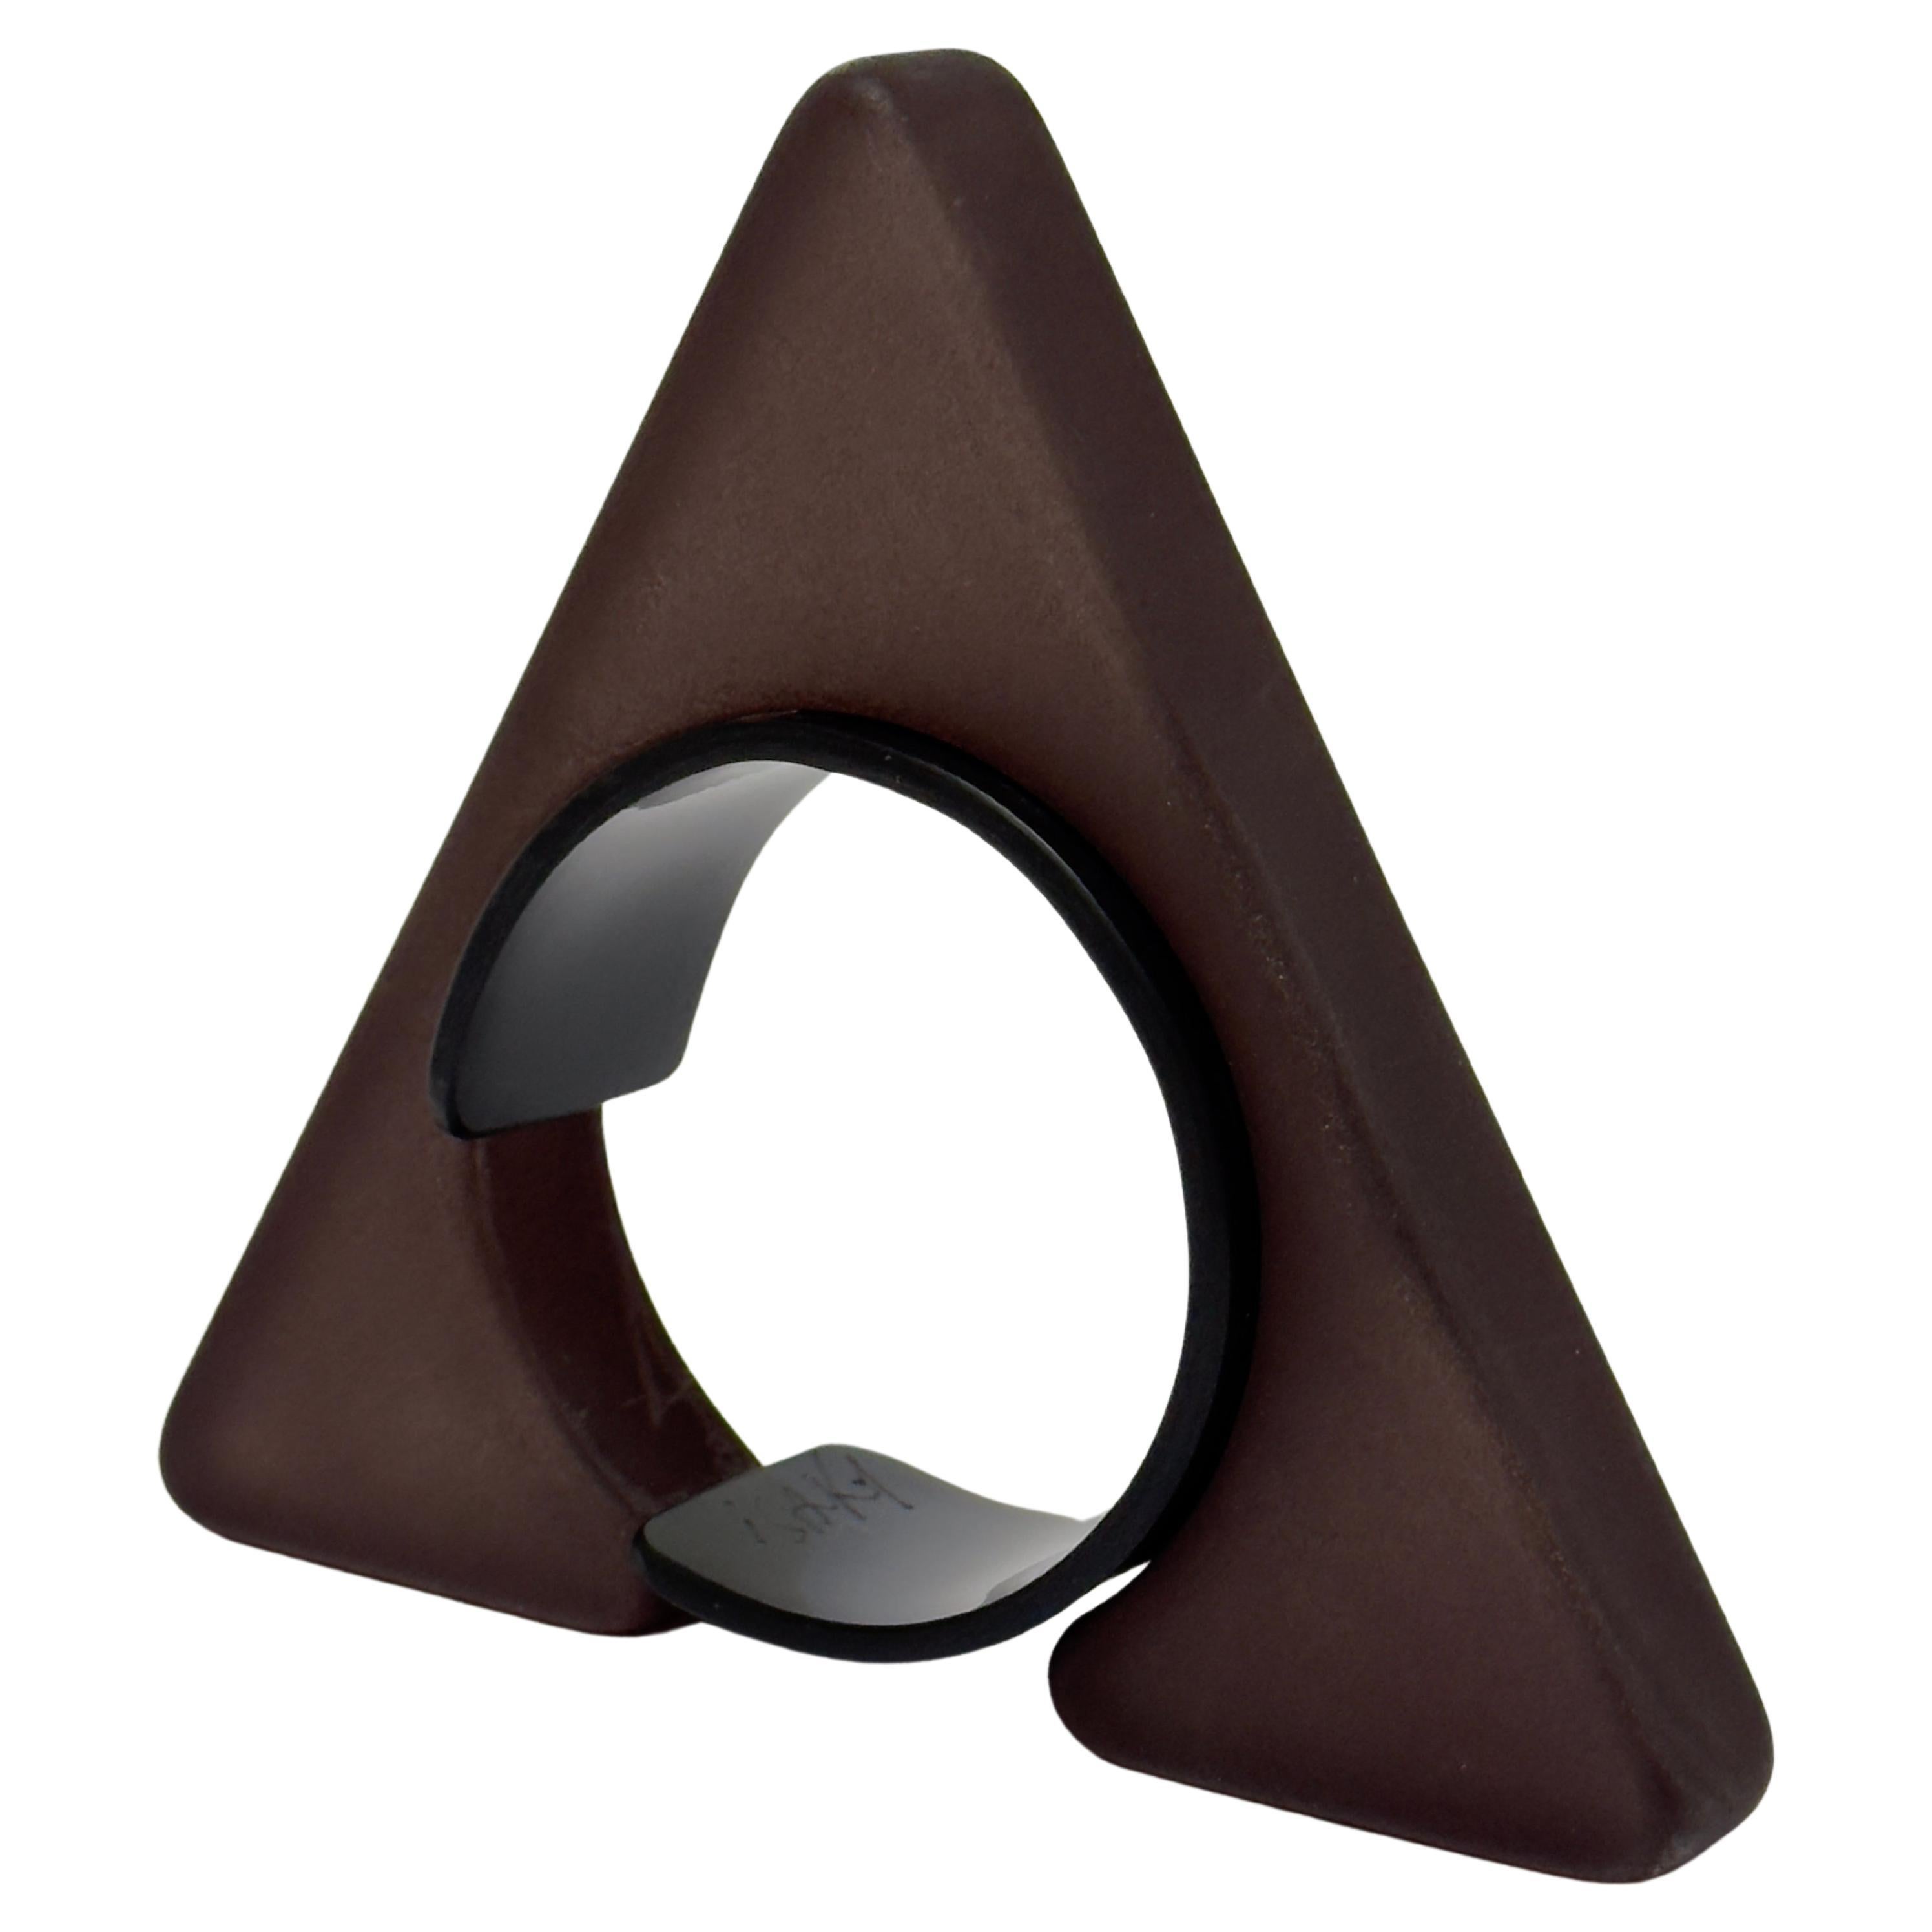 Half object, half jewel this sculptural bangle is composed of two parts ; a sand blasted resin triangle and an acrylic bracelet allowing the cuff to be closed.
Both parts bear the handwritten and engraved signature of the artist.

Measurements (cm)